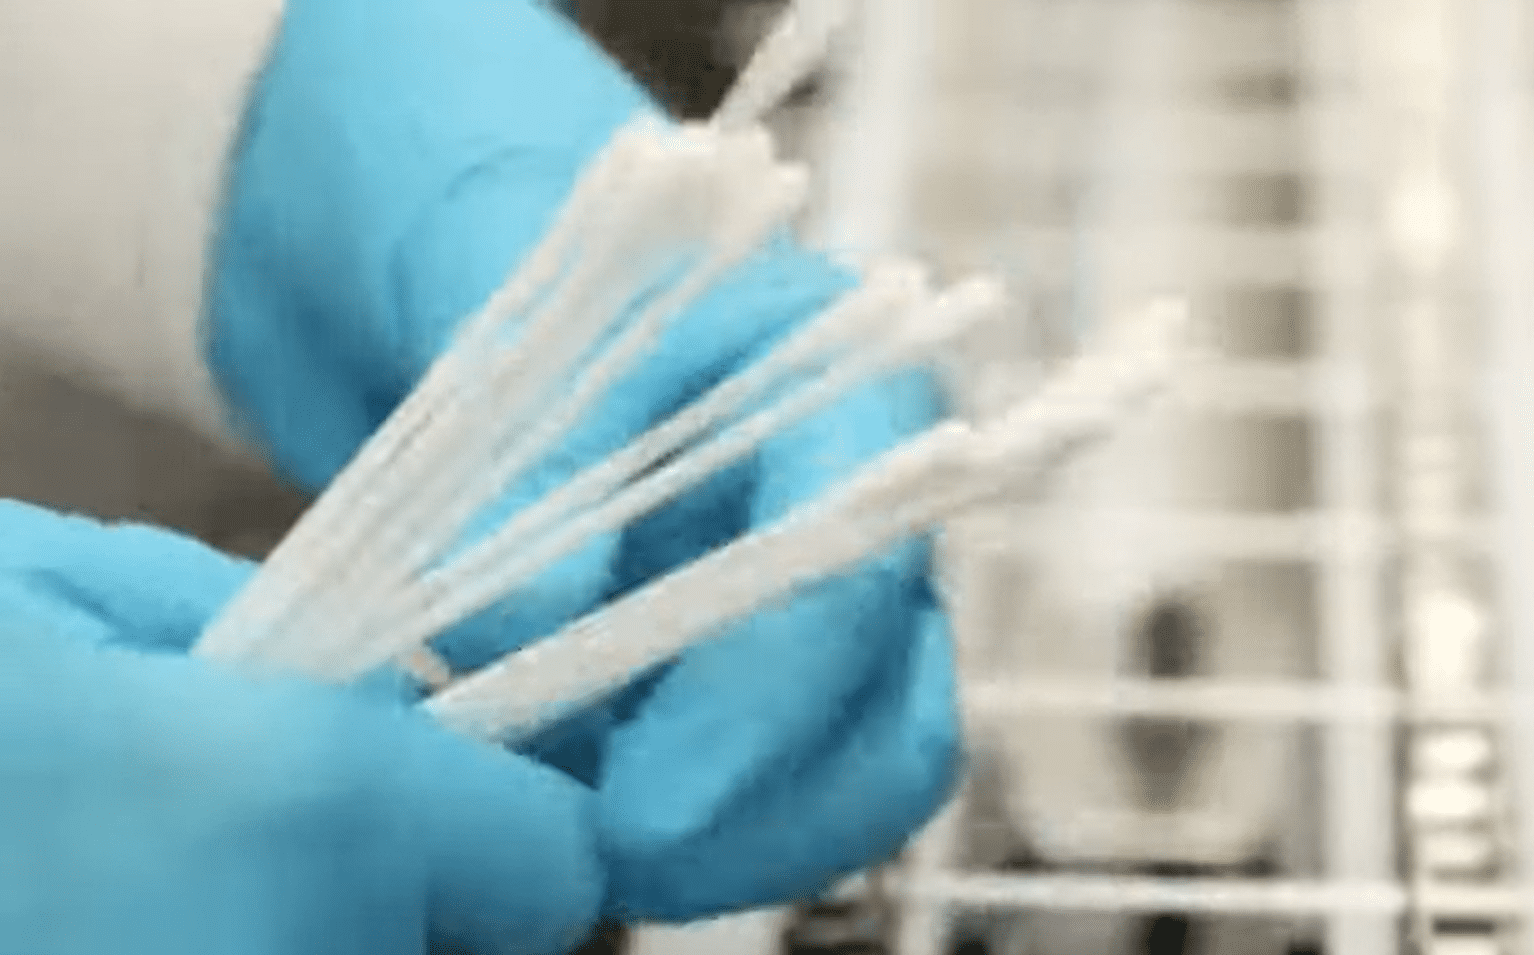 The manufacturing of medical swabs at Puritan Medical Products. | Source: youtube.com/NEWS CENTER Maine